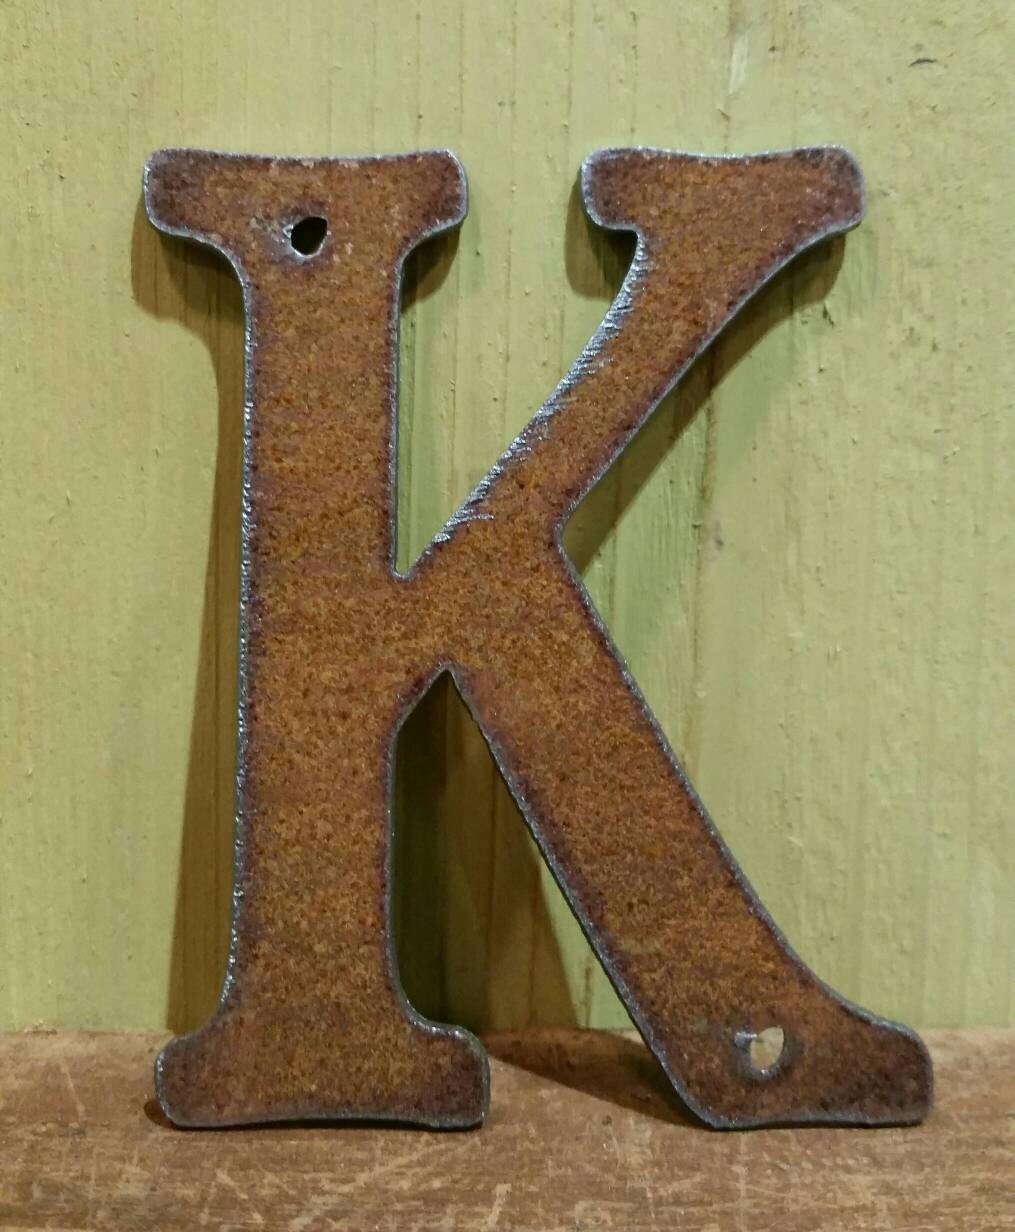 12 Inch Metal Letters and Numbers RUSTY or NATURAL Finish